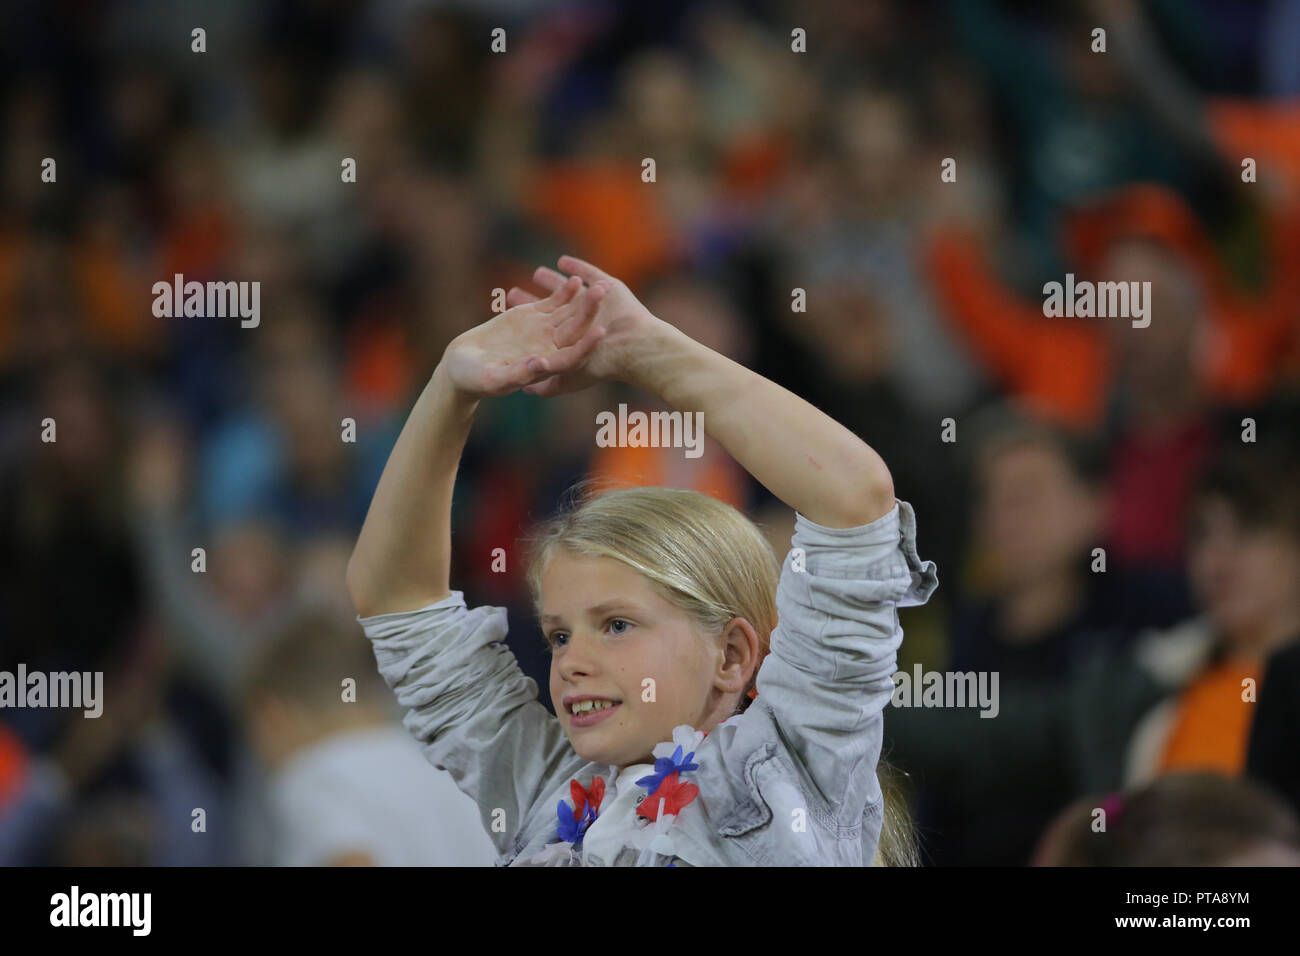 Football fan of Netherlands watch the match agains Denmark for qualification to the world cup. Stock Photo